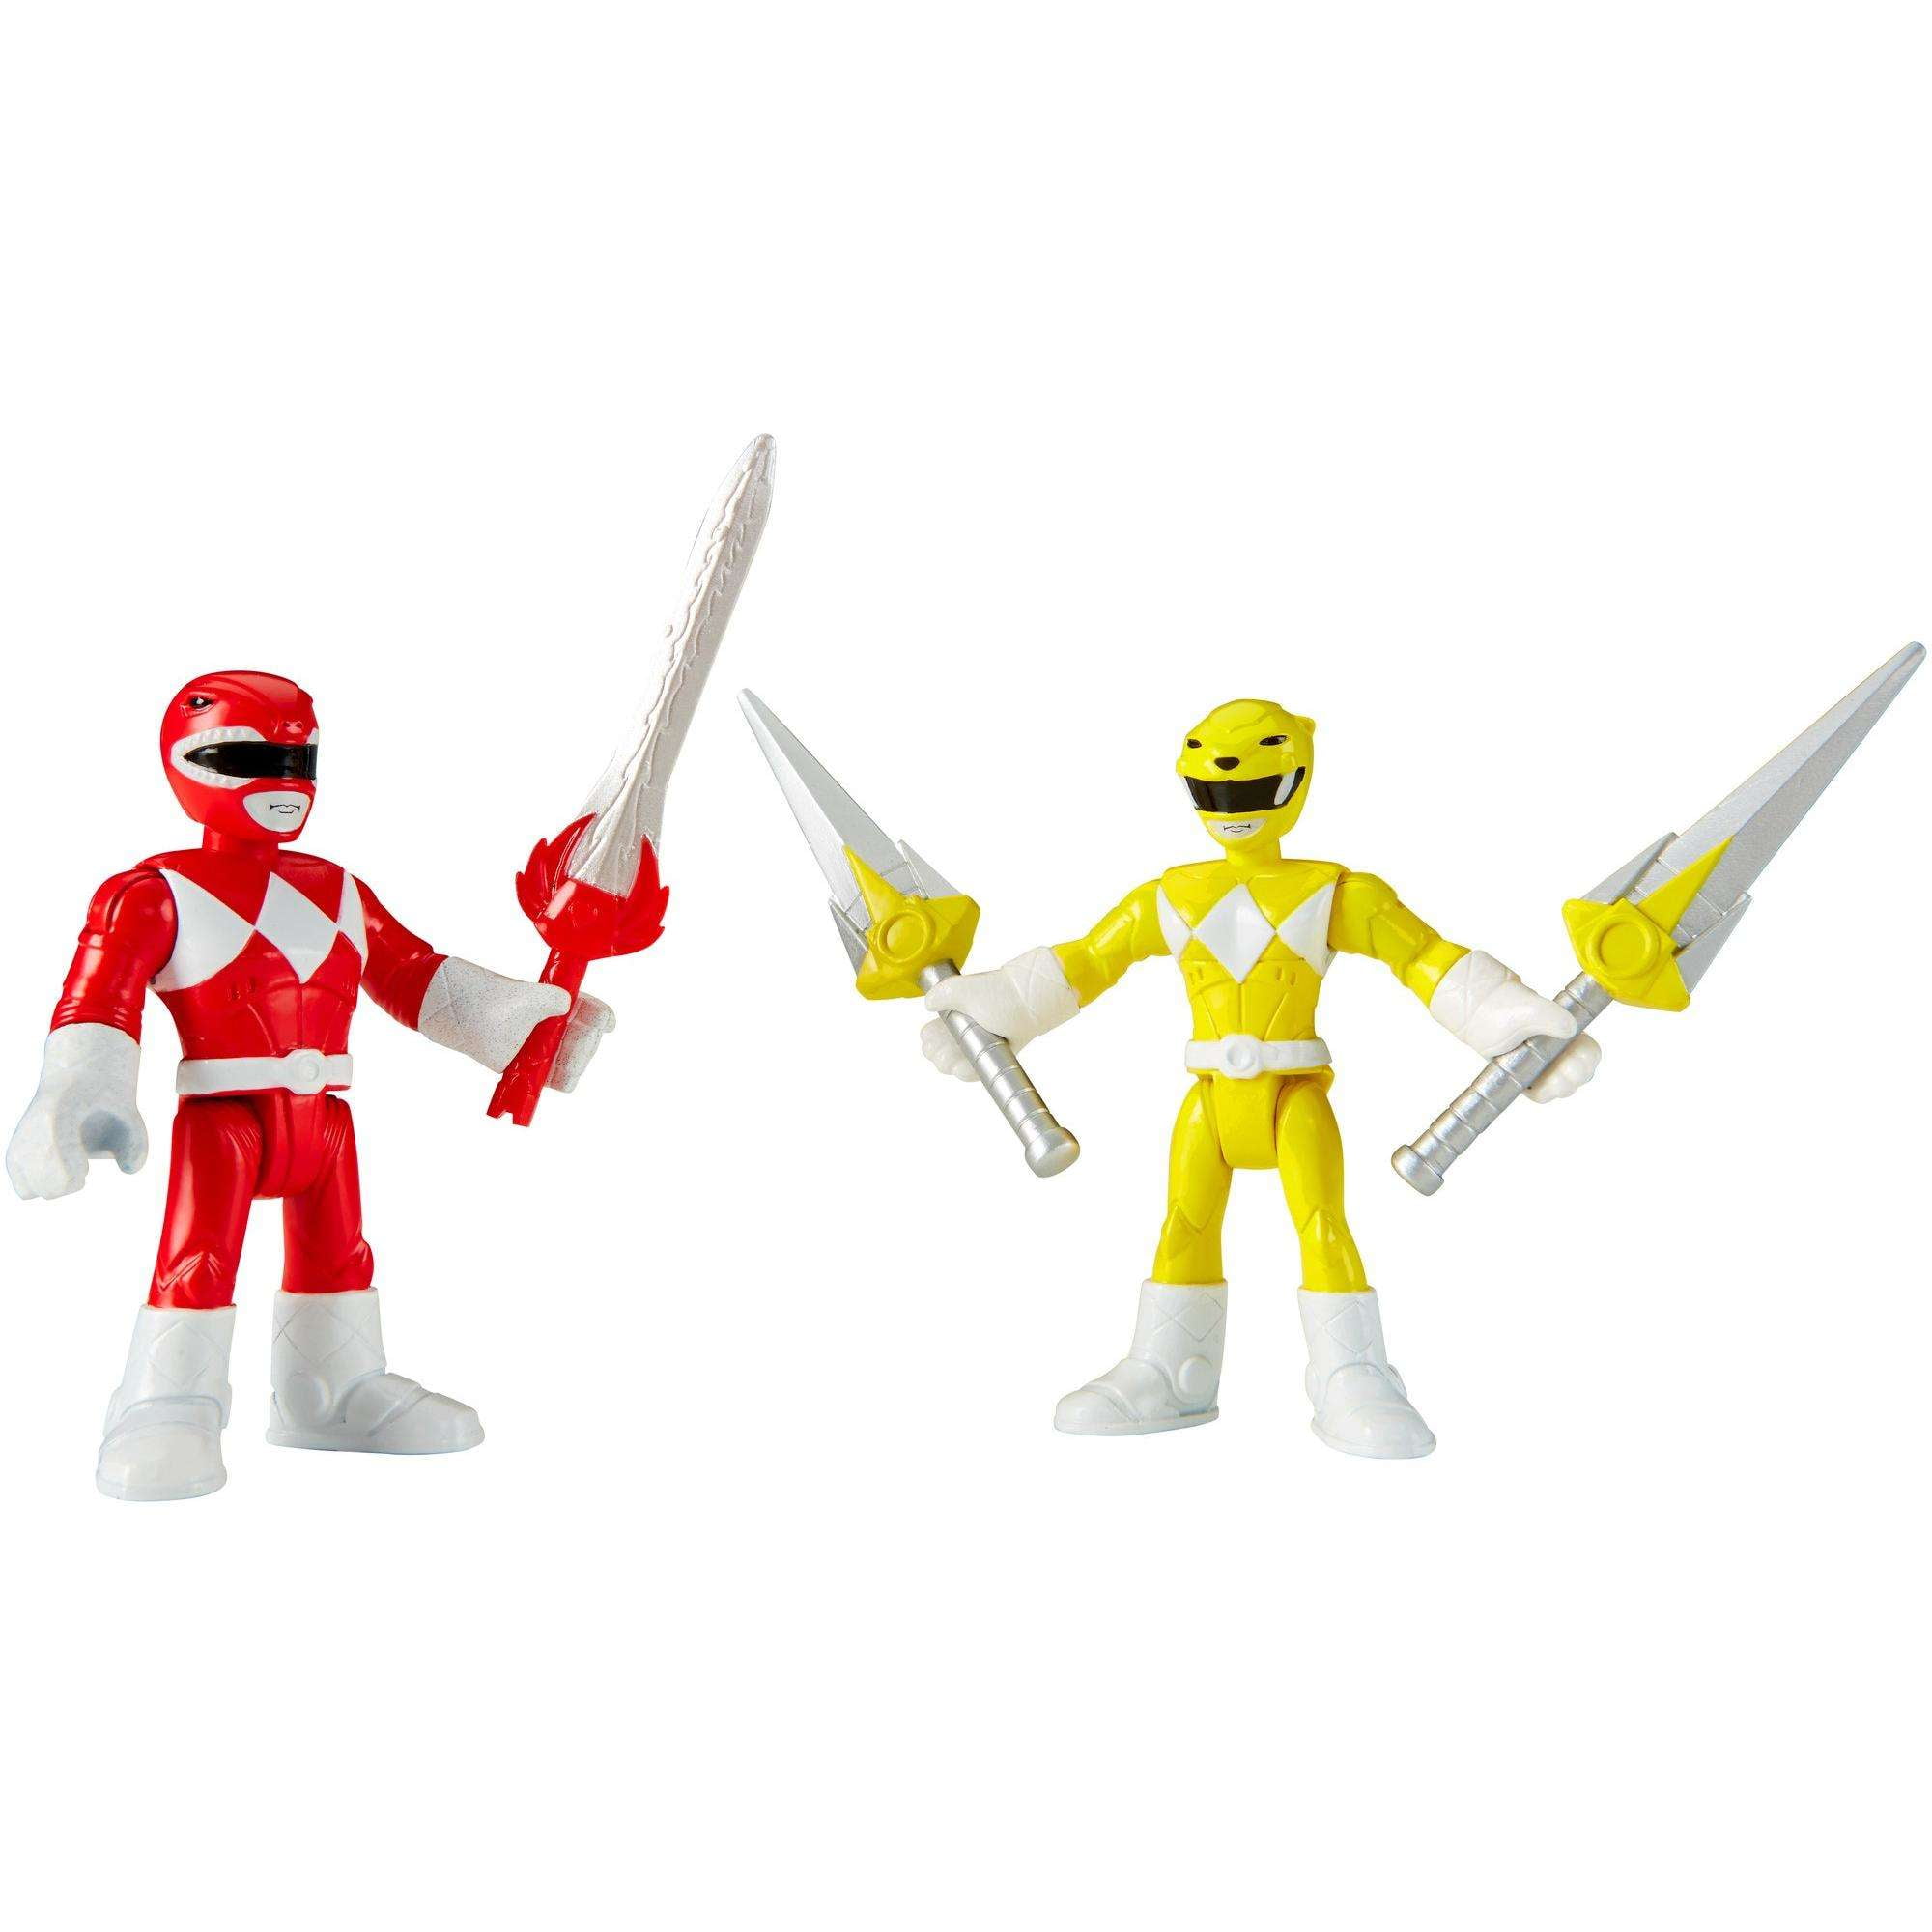 Details about   3x Fisher-Price Imaginext Power Rangers Yellow Red Action Figure Mighty Morphin 